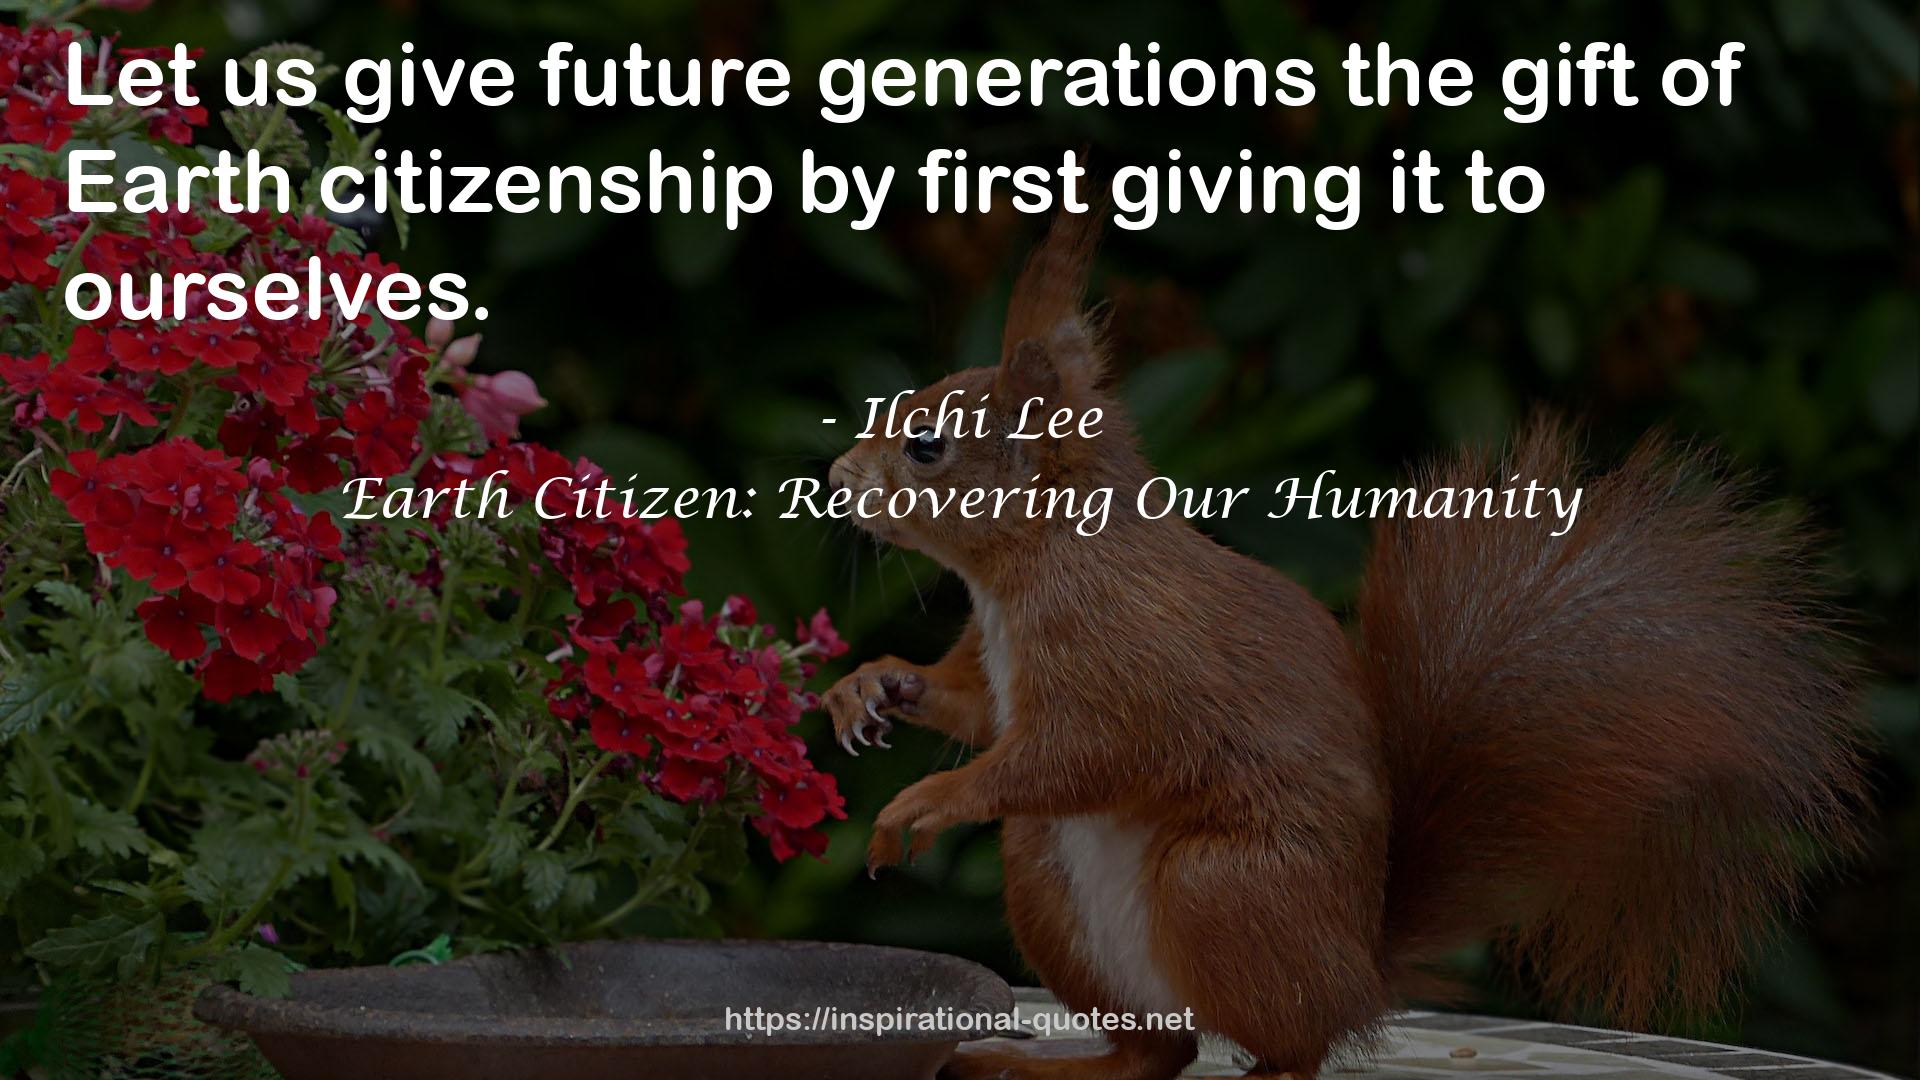 Earth Citizen: Recovering Our Humanity QUOTES